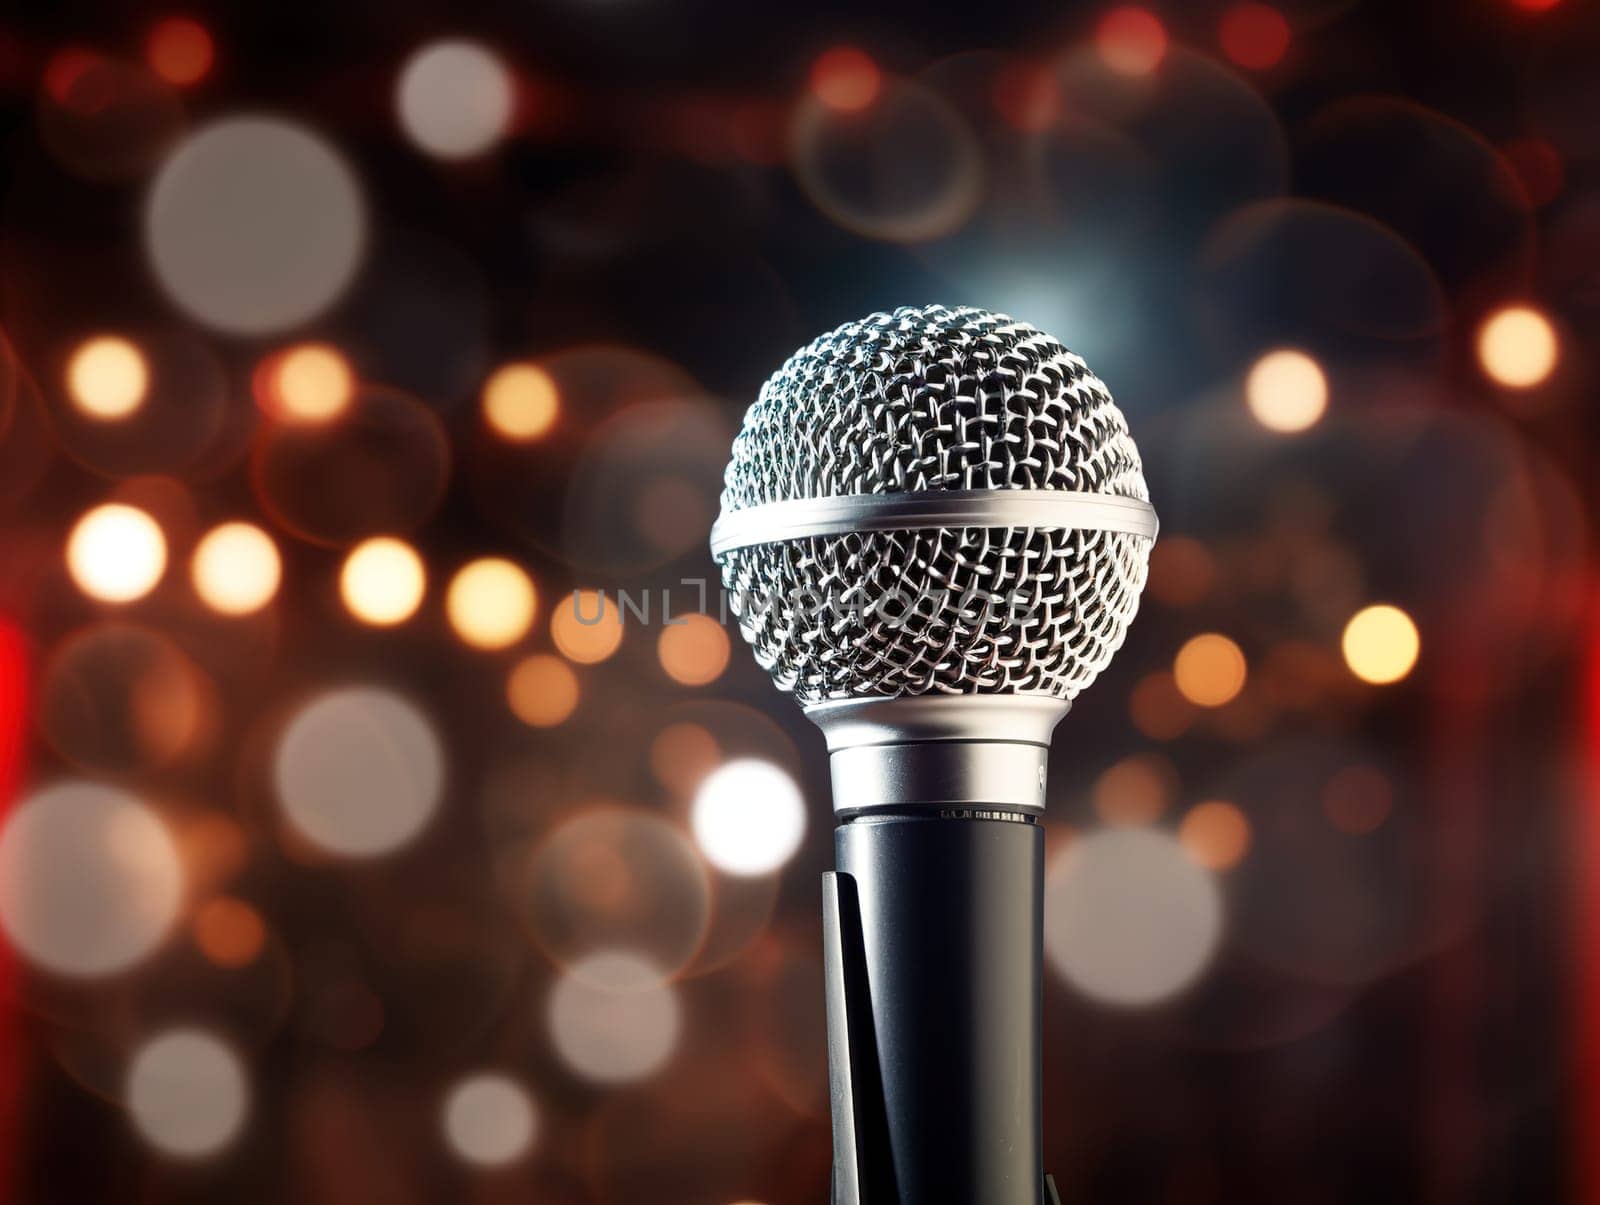 Detail to a microphone on the stage with glowing blurred background